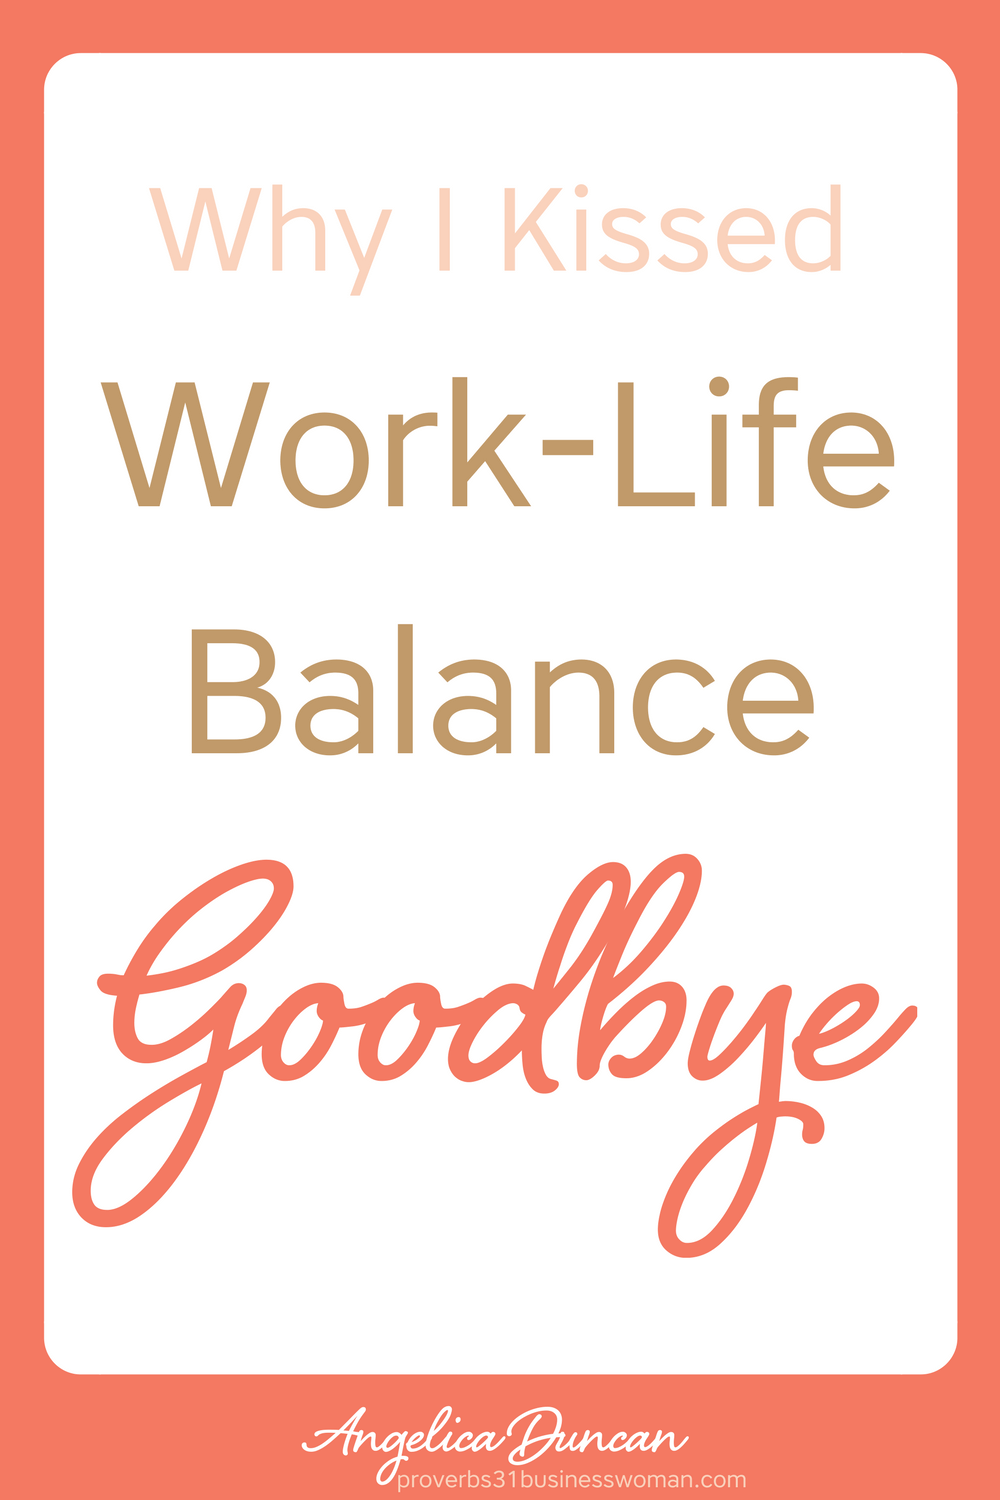 Is work-life balance achievable? If you're anything like me, it's a moving target Let me offer you something more realistic and meaningful! #mompreneur #onlinebusiness #wahm #womeninbusiness #christianbusiness #christianwomeninbusiness #christianentrepreneurs #proverbs31 #proverbs31woman #proverbs31businesswoman #proverbs31enrepreneur #p31 #angelicaduncan #silkoversteel #sos